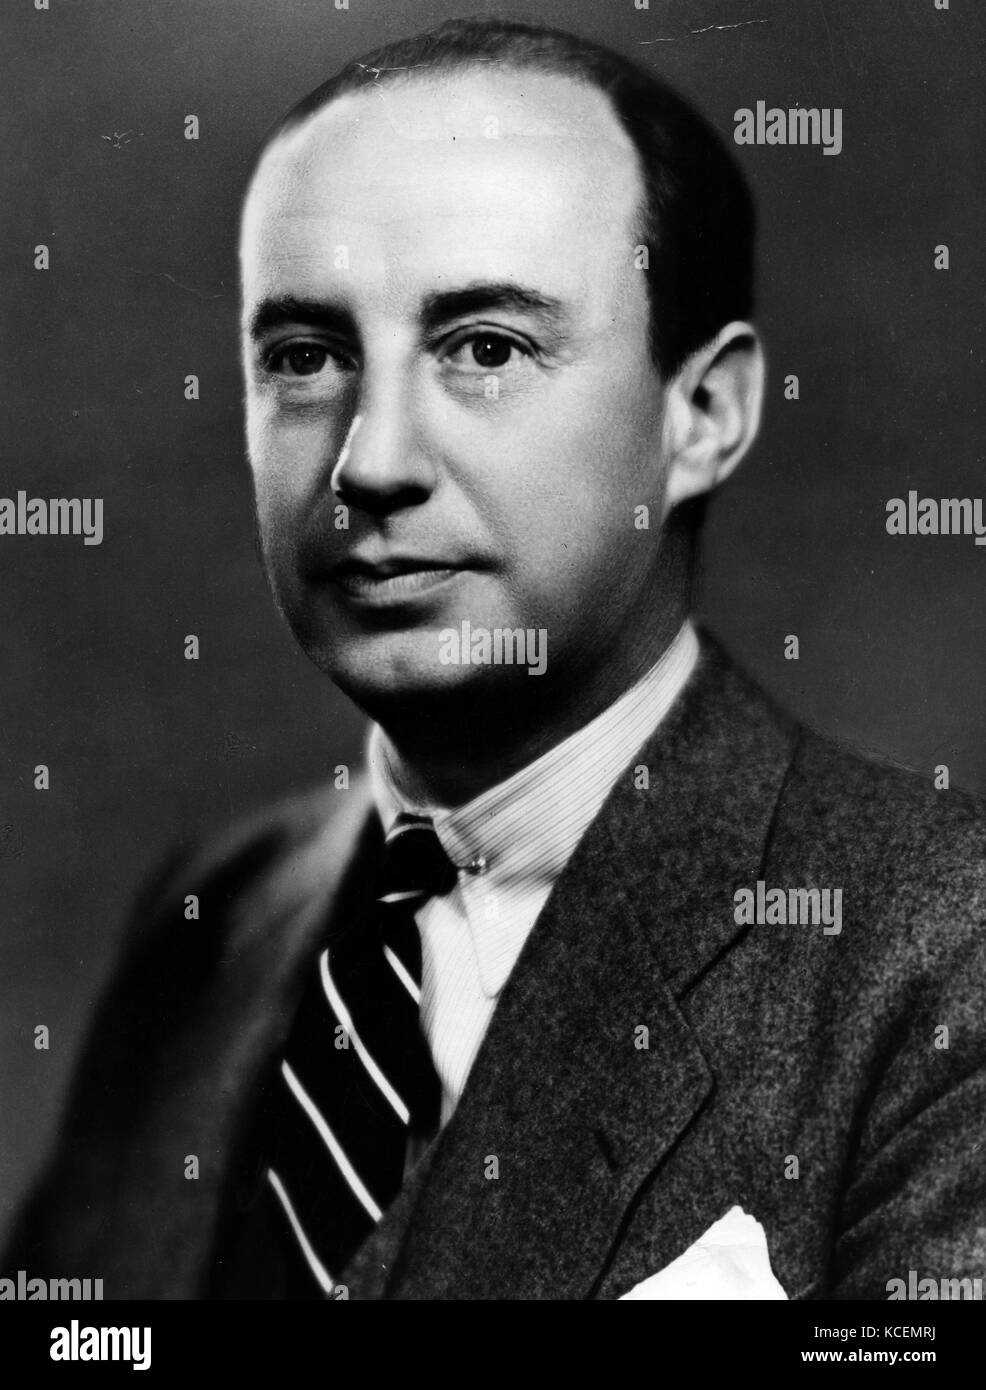 Adlai Ewing Stevenson II (1900 – 1965) American politician and diplomat, noted for his intellectual demeanour, eloquent public speaking, and promotion of progressive causes in the Democratic Party. He served as the 31st Governor of Illinois, and received the Democratic Party's nomination for president in 1952 even though he had not campaigned in the primaries Stock Photo